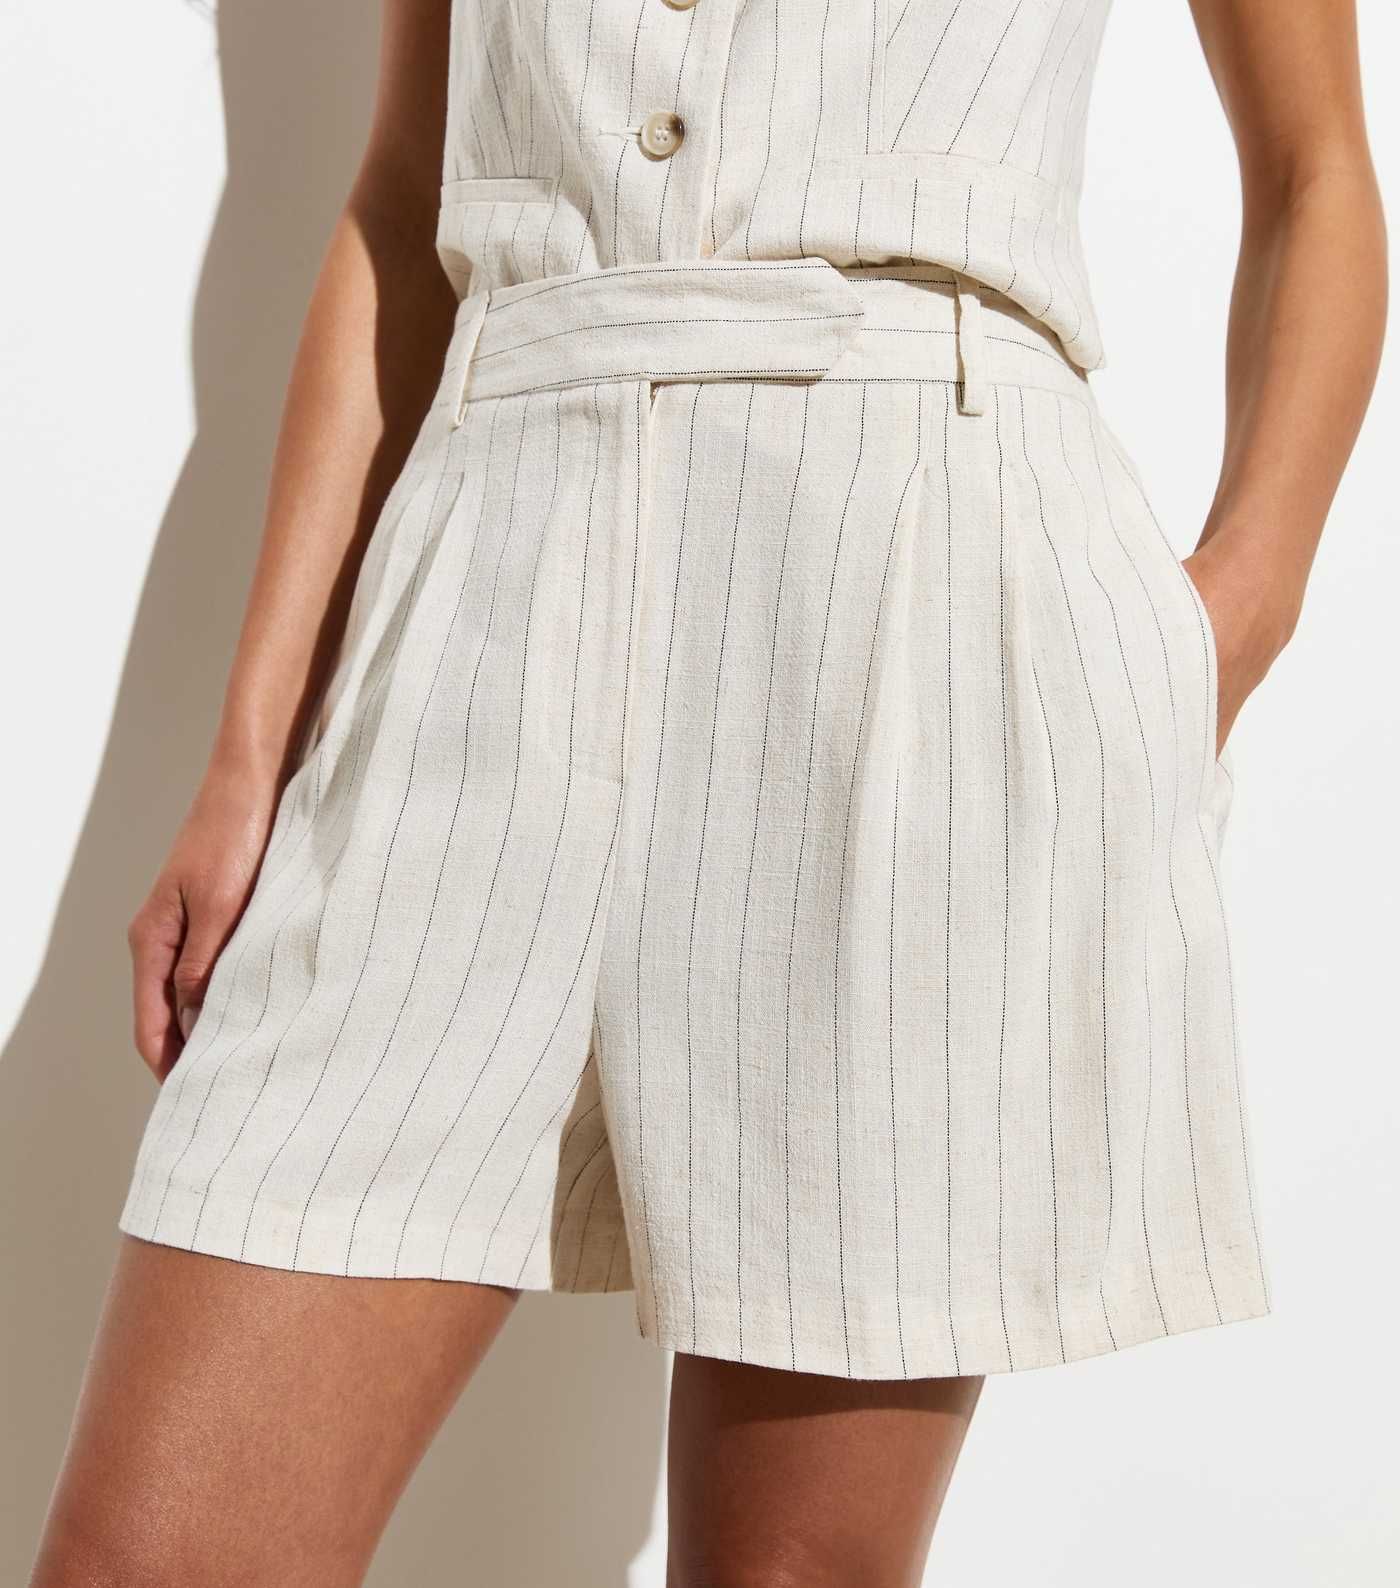 Off White Pinstripe Tailored Shorts
						
						Add to Saved Items
						Remove from Saved Items | New Look (UK)